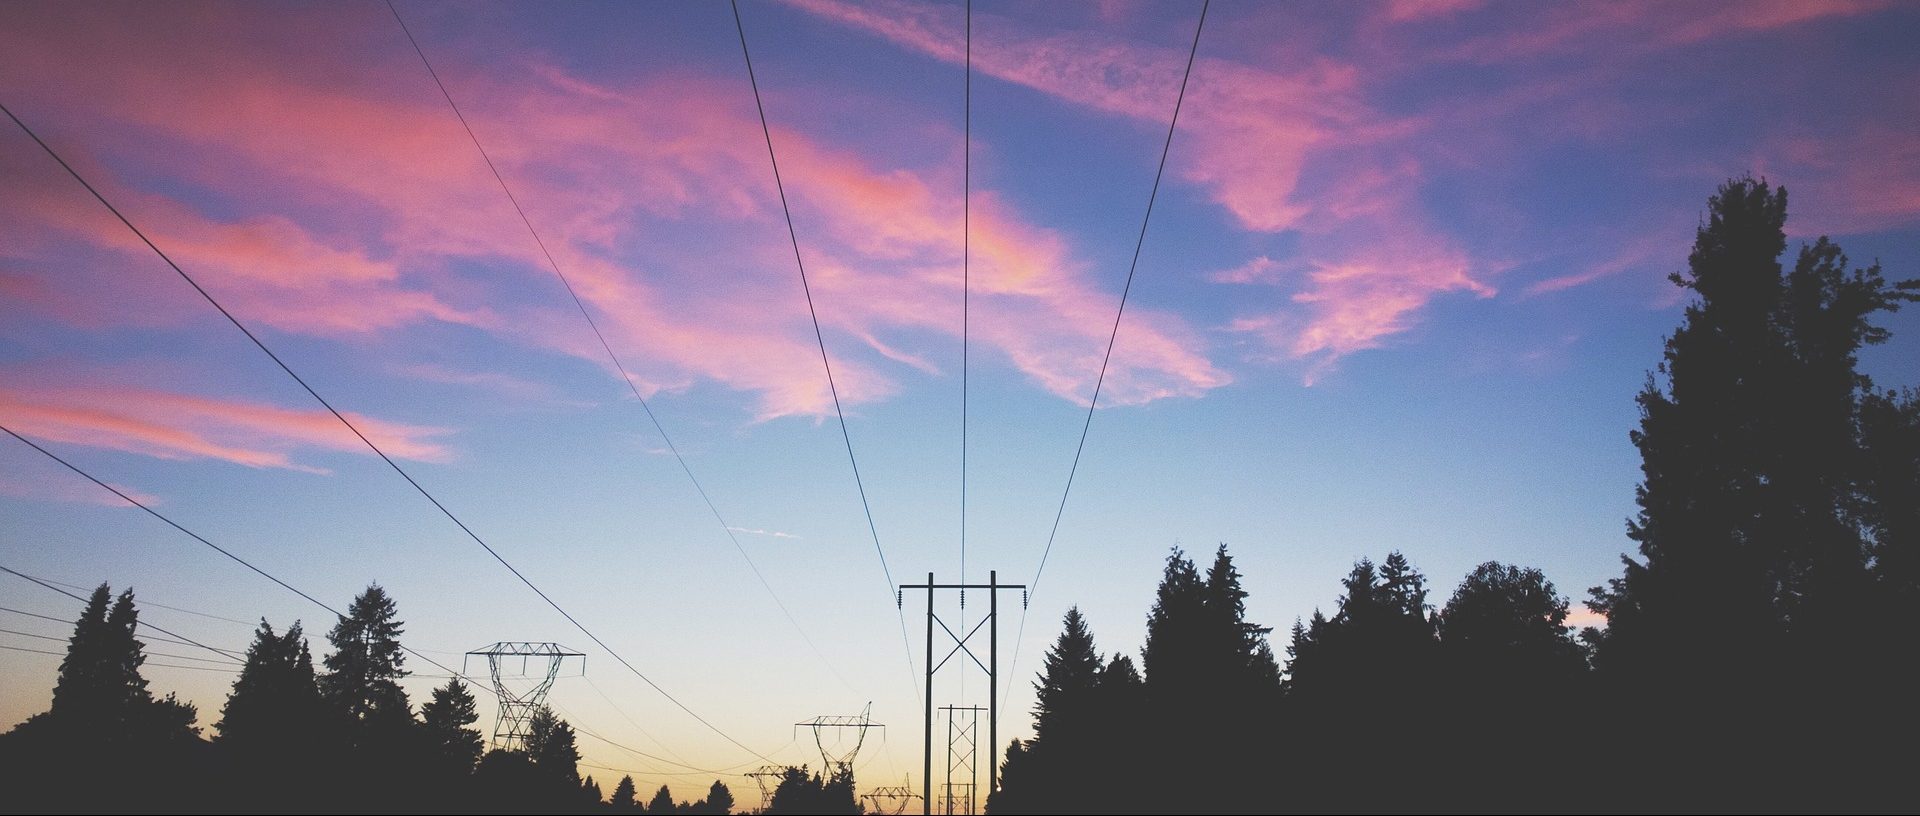 Power lines and pylons in front of a pinkish sky at dusk